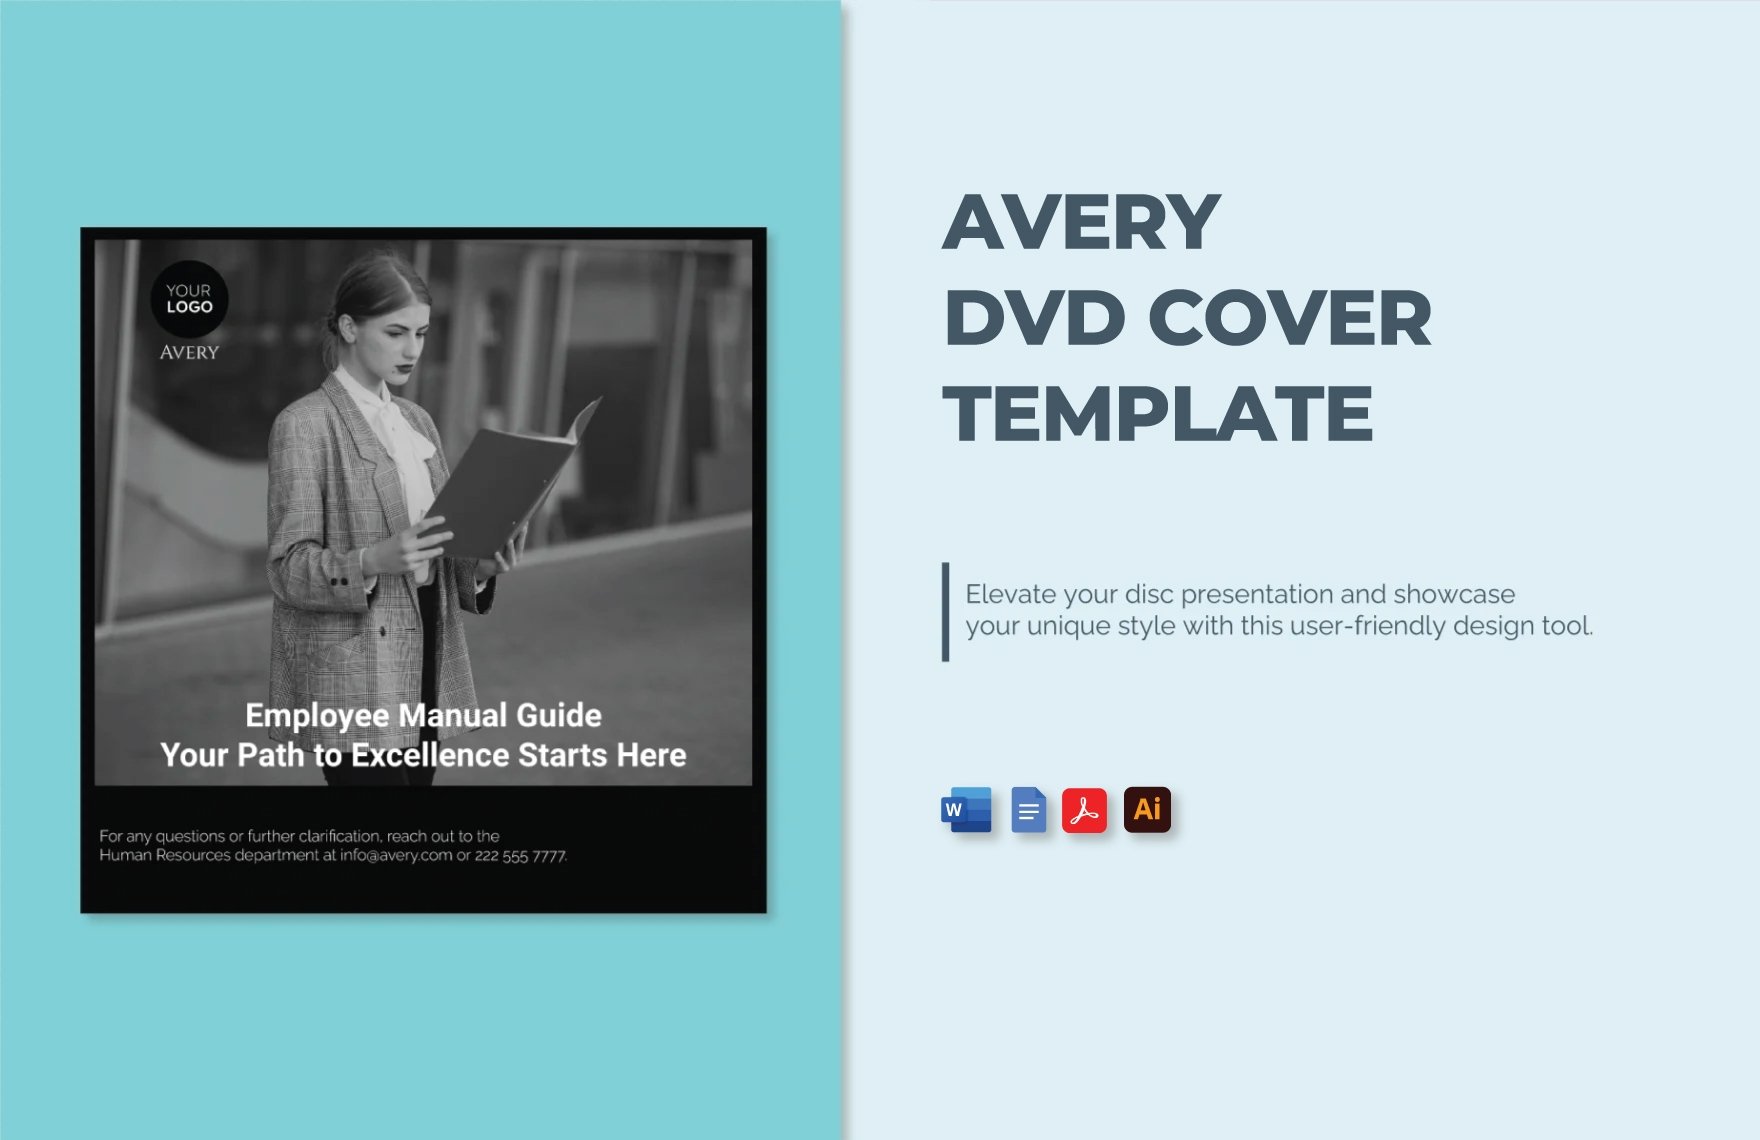 Free Avery DVD Cover Template in Word, Google Docs, PDF, Illustrator